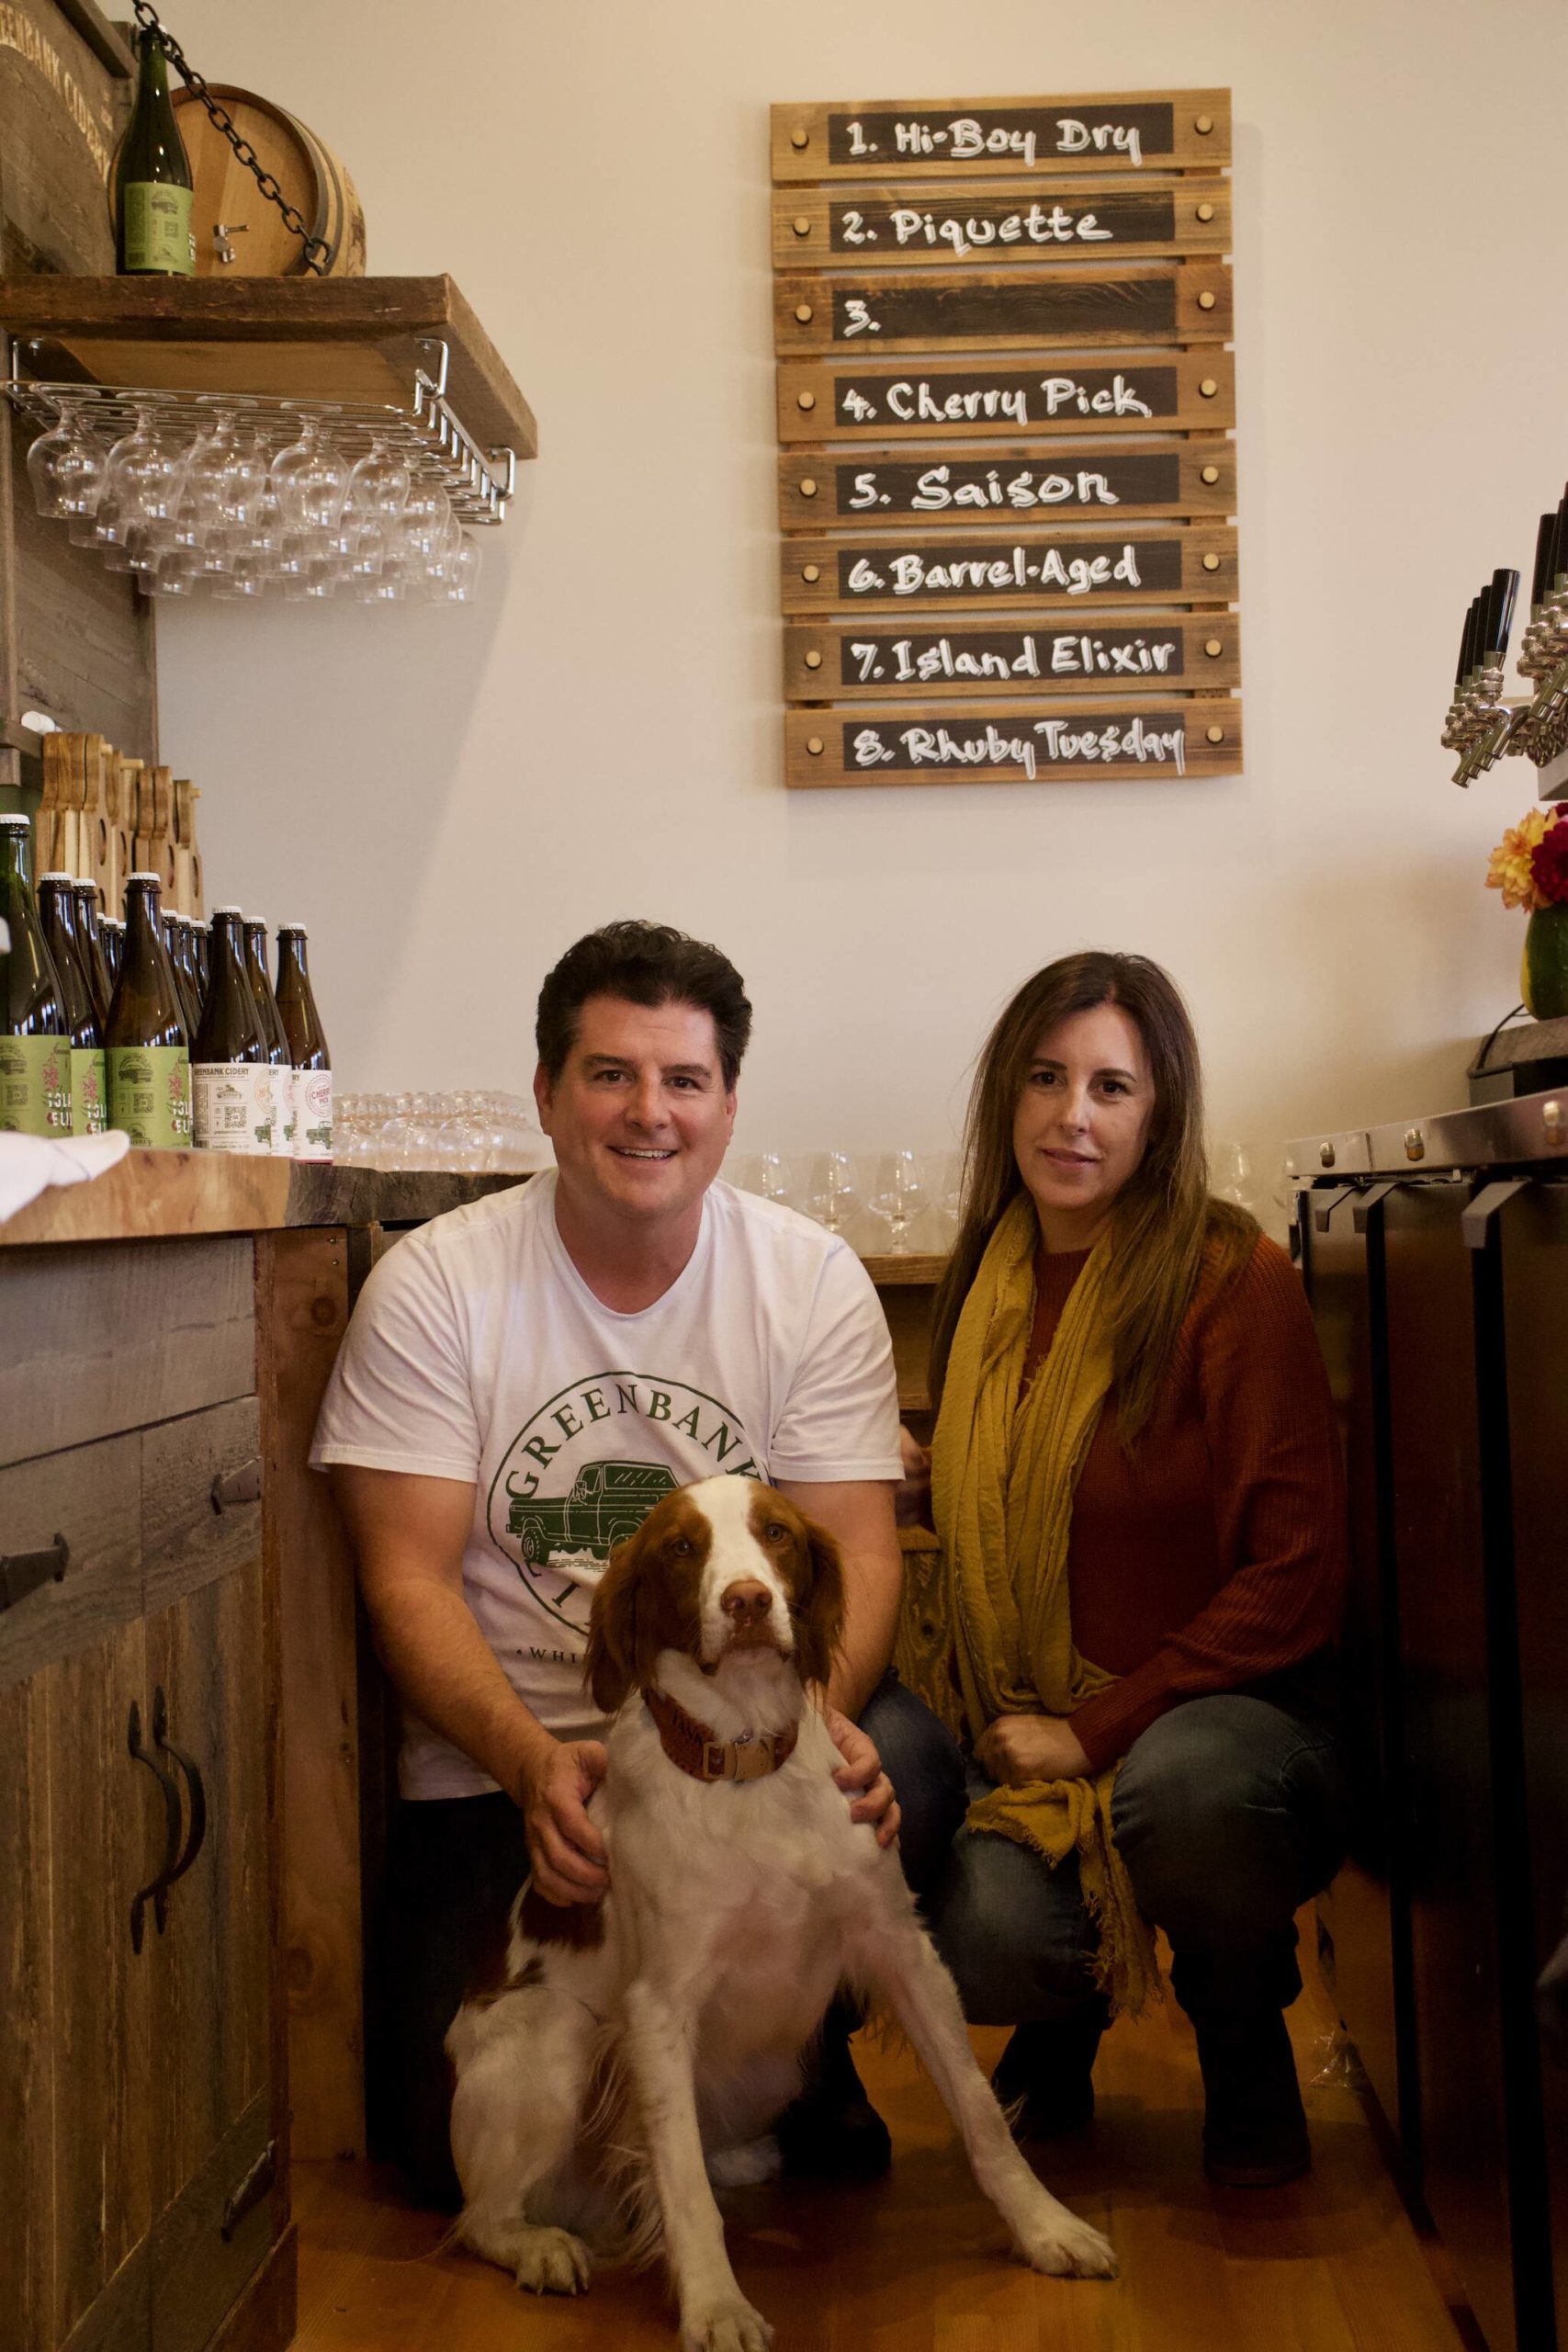 Photo by Rachel Rosen/Whidbey News-Times
Jeff Stoner, Kim Taylor and their dog Tate. Greenbank Cidery’s taproom allows friendly dogs.